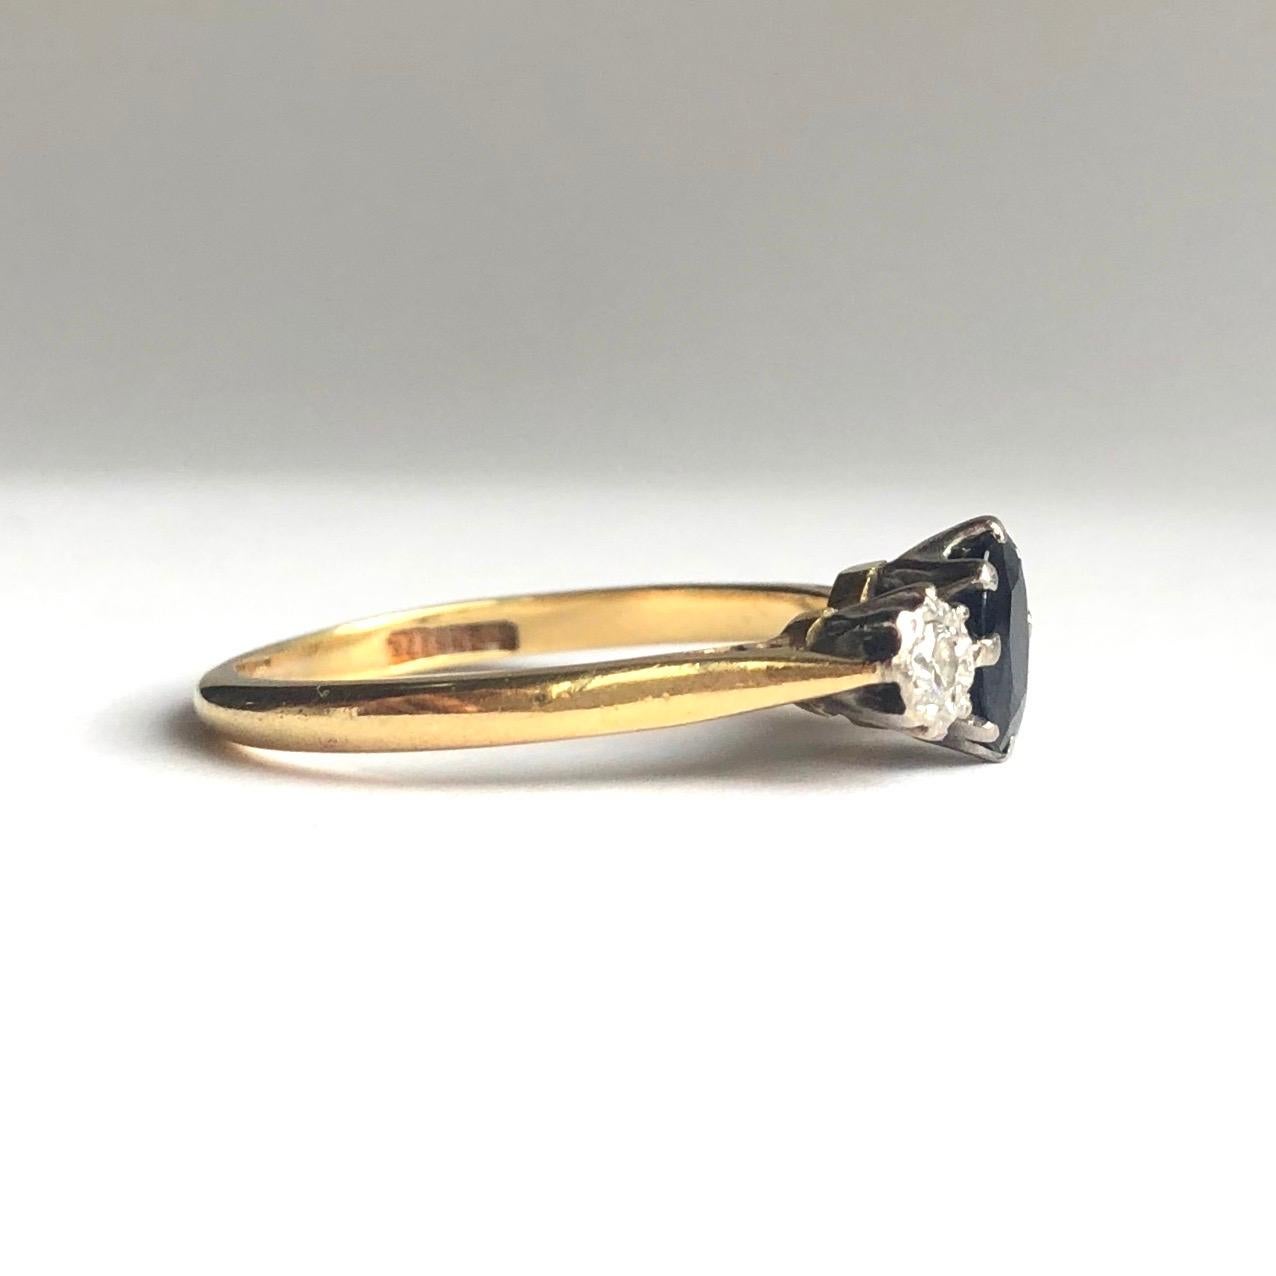 Sat in-between two 7pt diamonds is a 70pt deep blue sapphire. The diamonds are bright and sparkly and the stones are all set in platinum with the rest of the band modelled in 18ct gold. 

Ring Size: N 1/2 or 7 
Widest Point: 7mm
Height Off Finger: